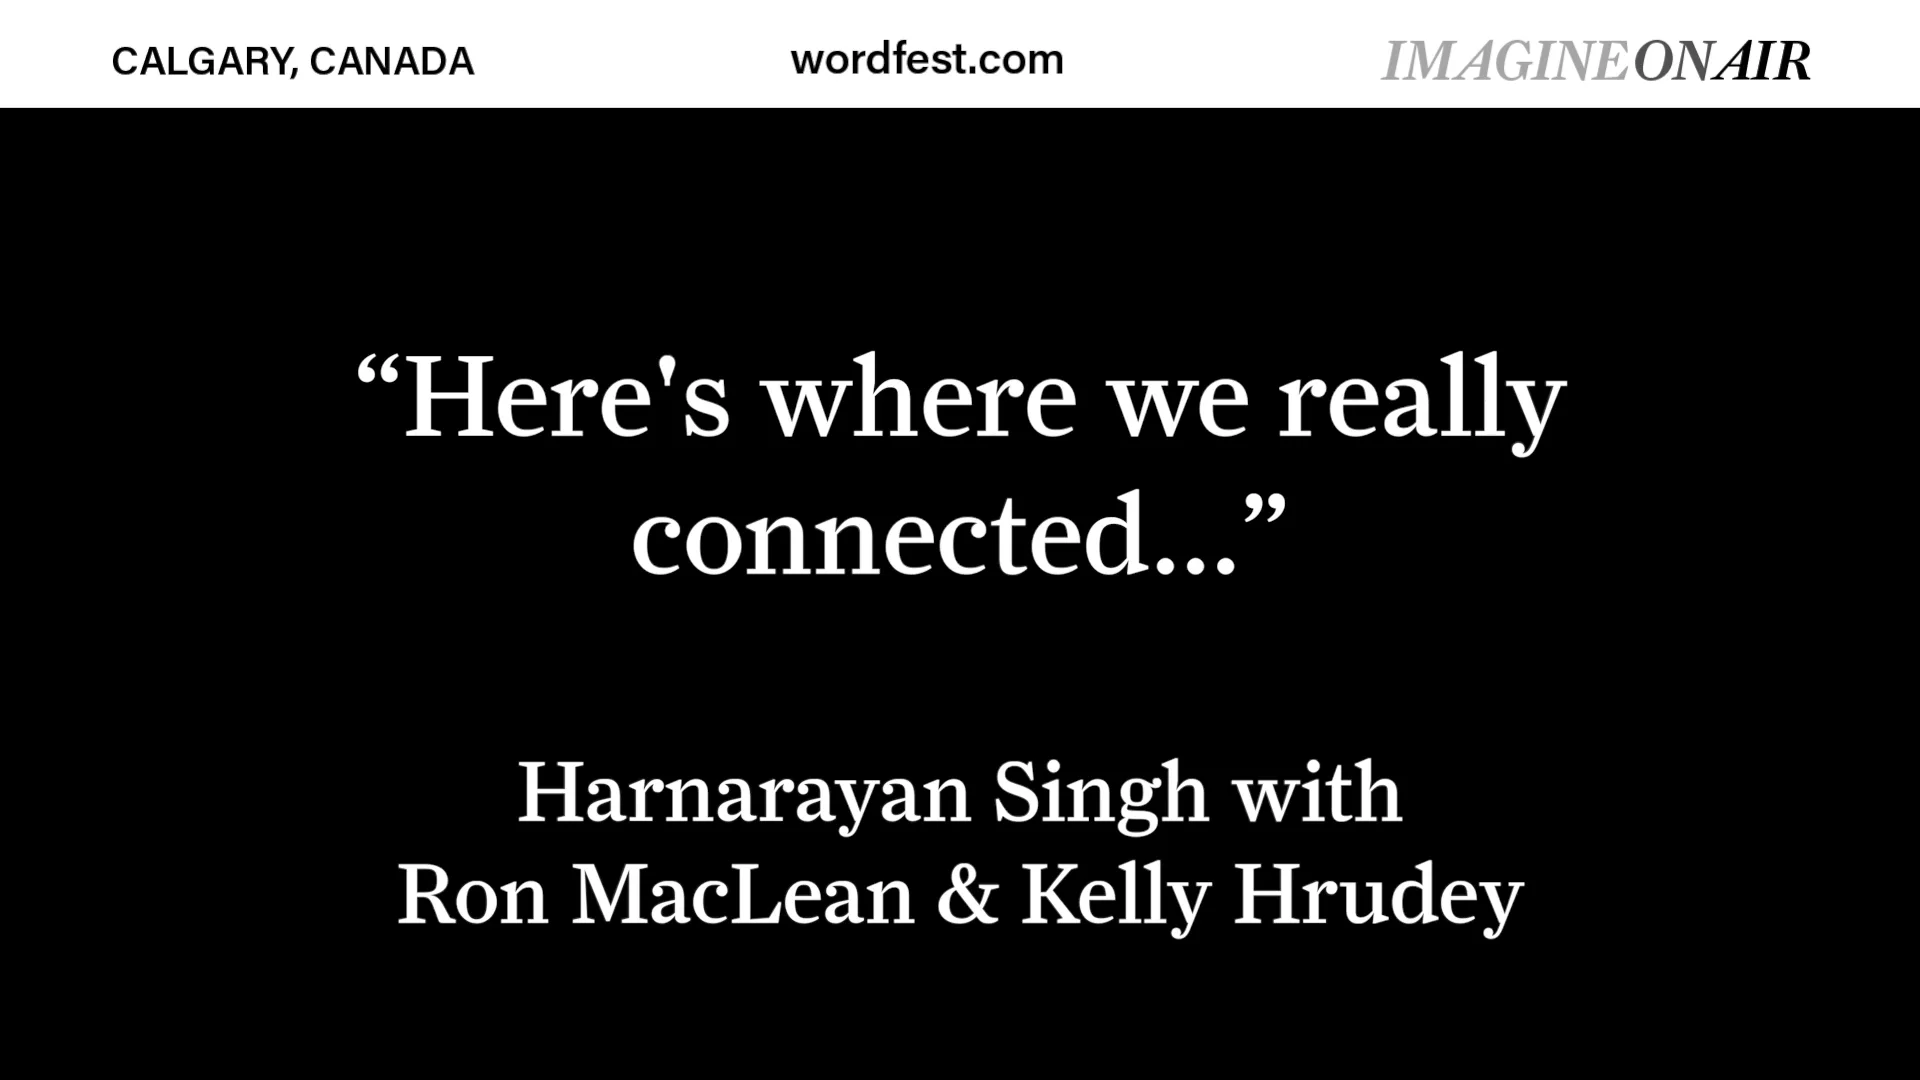 His heart is so big”: Harnarayan Singh on surprising Kelly Hrudey with  heartfelt on-air moment